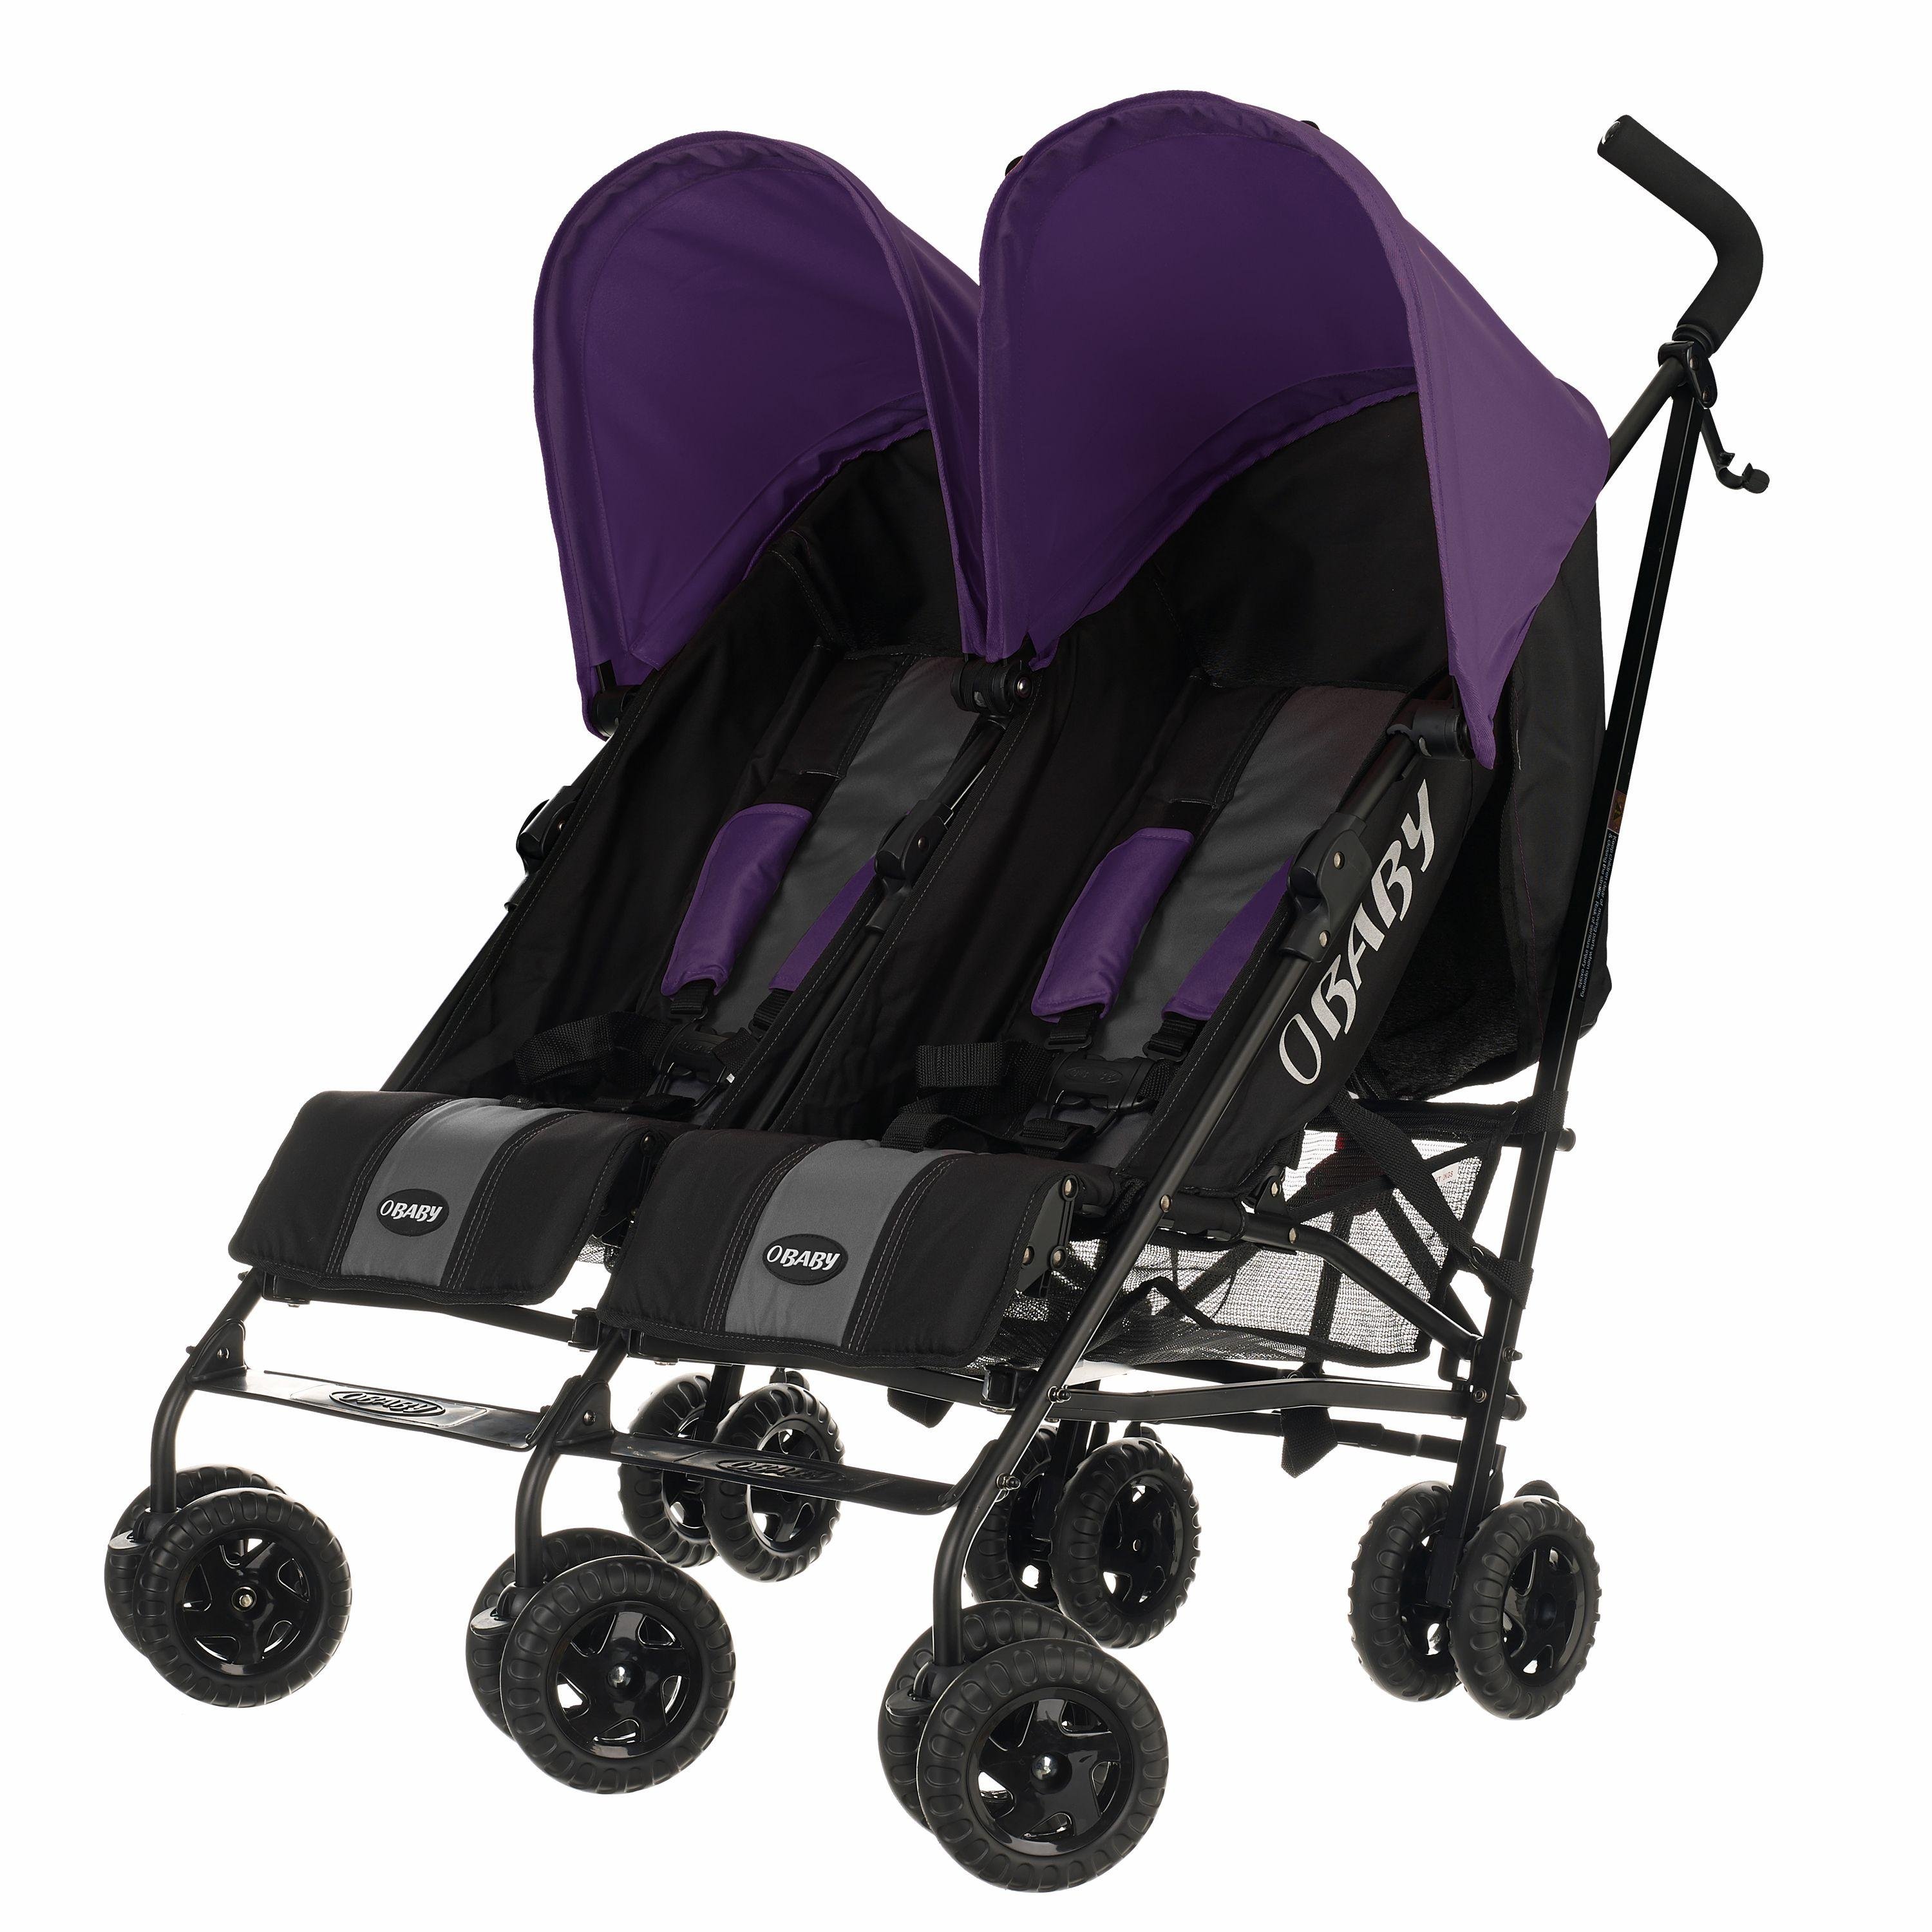 Obaby Apollo Black and Grey Double Pushchair - Purple